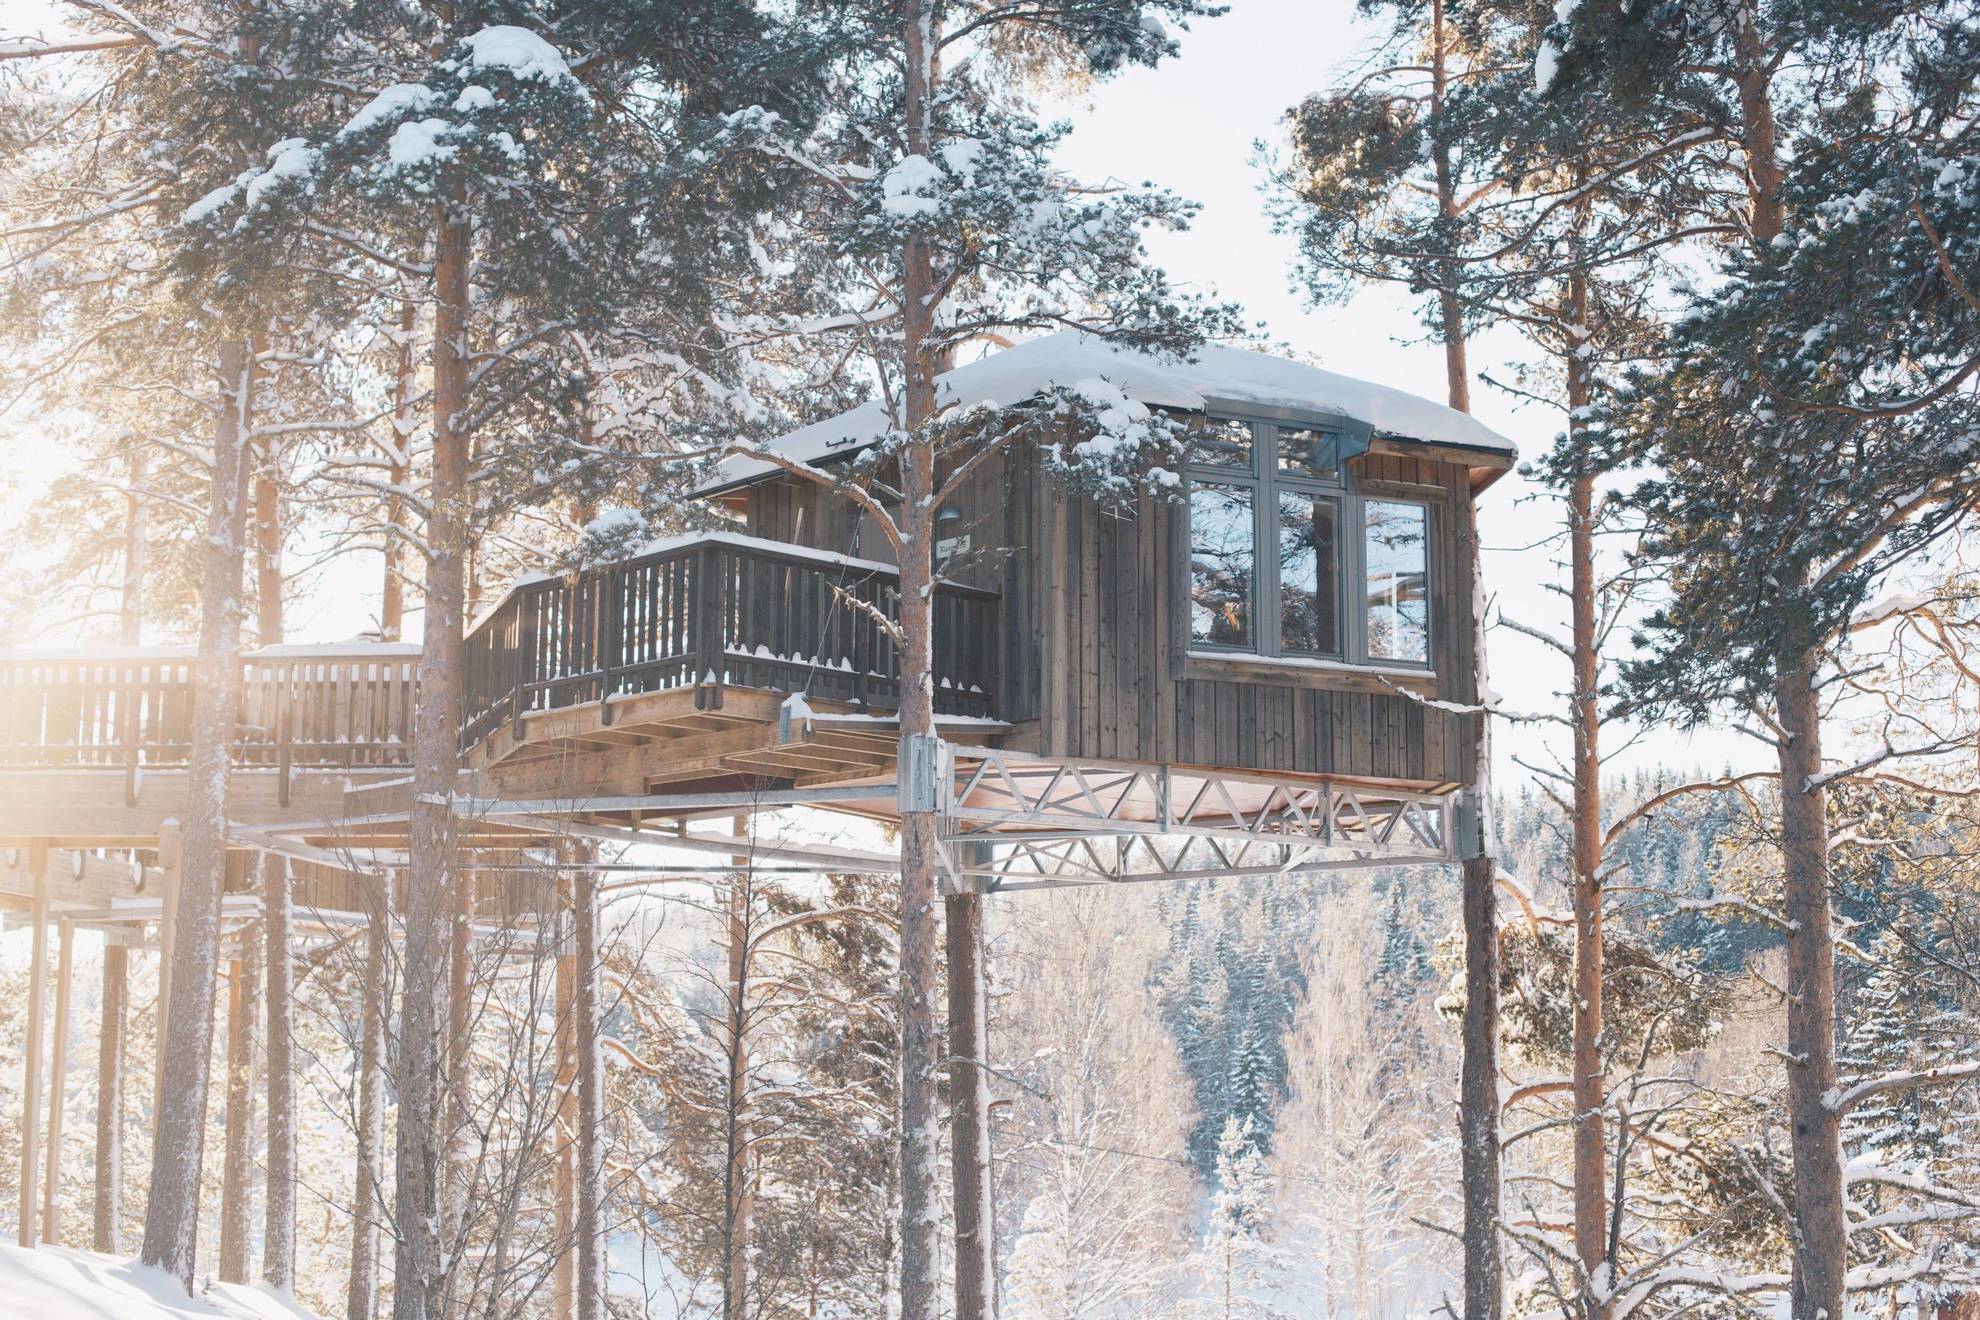 A wooden tree house in a snowy winter environment in the forest, seen from below.